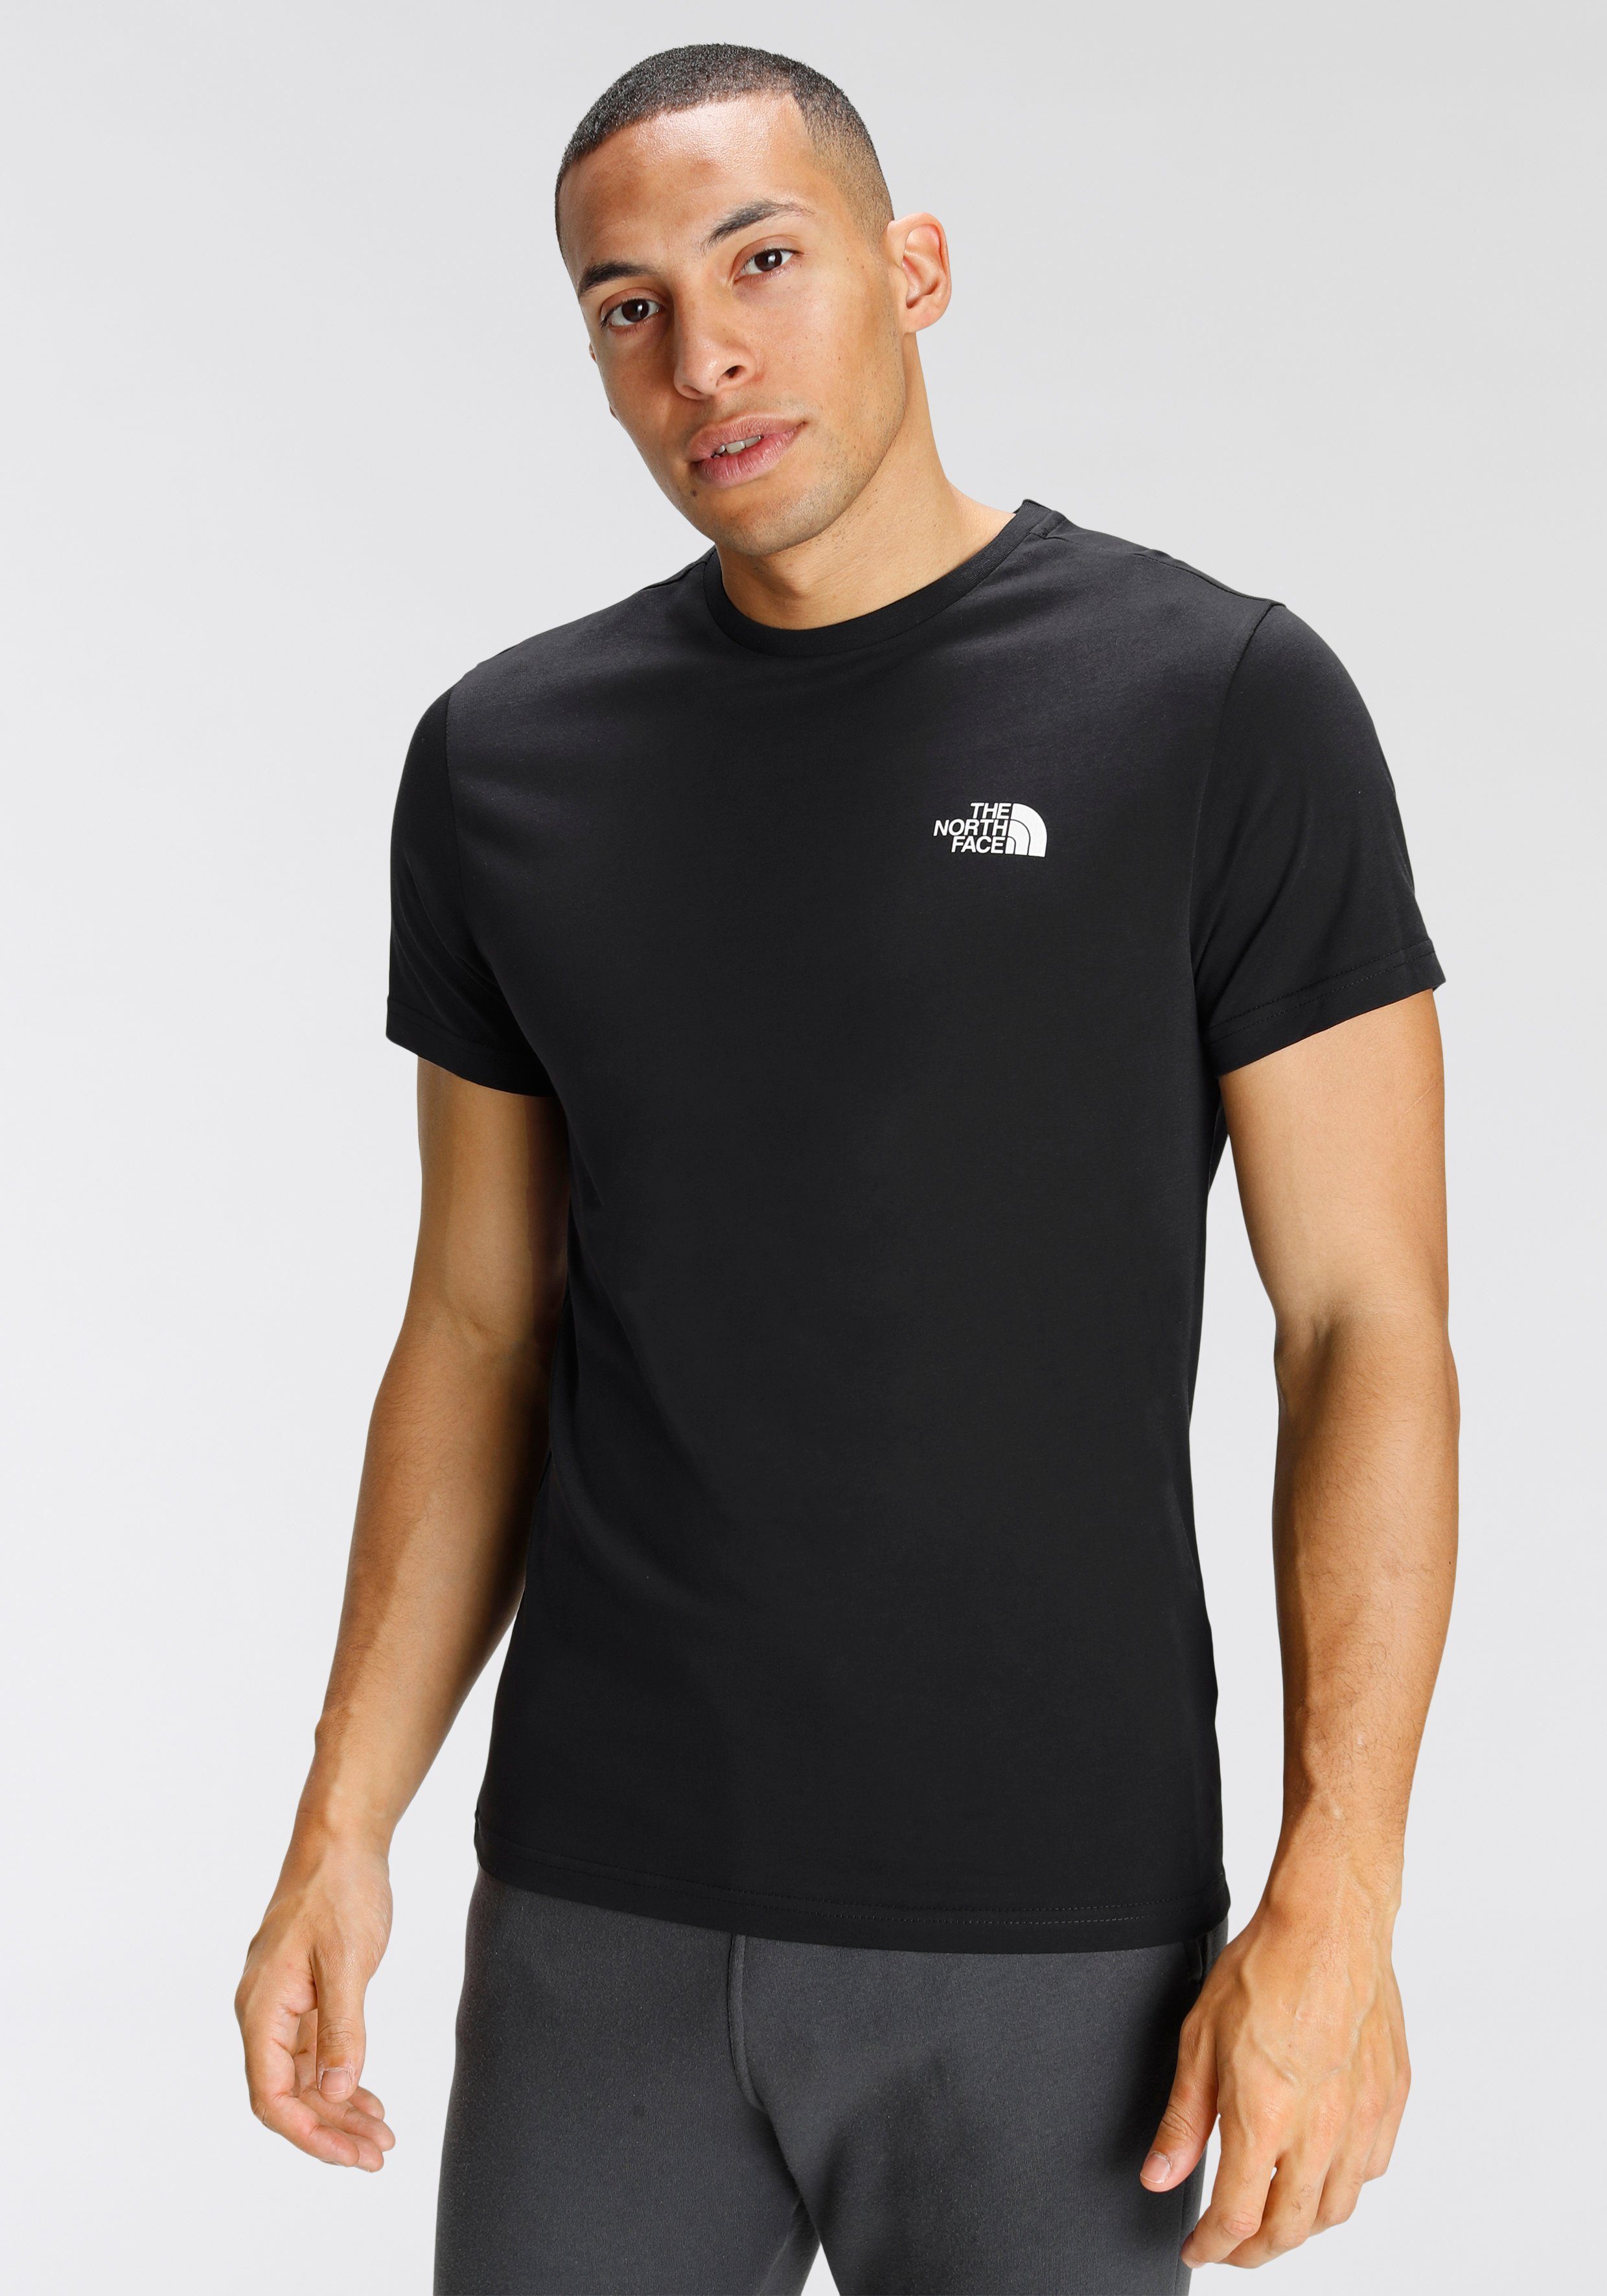 The North Face Funktionsshirt SIMPLE DOME schwarz